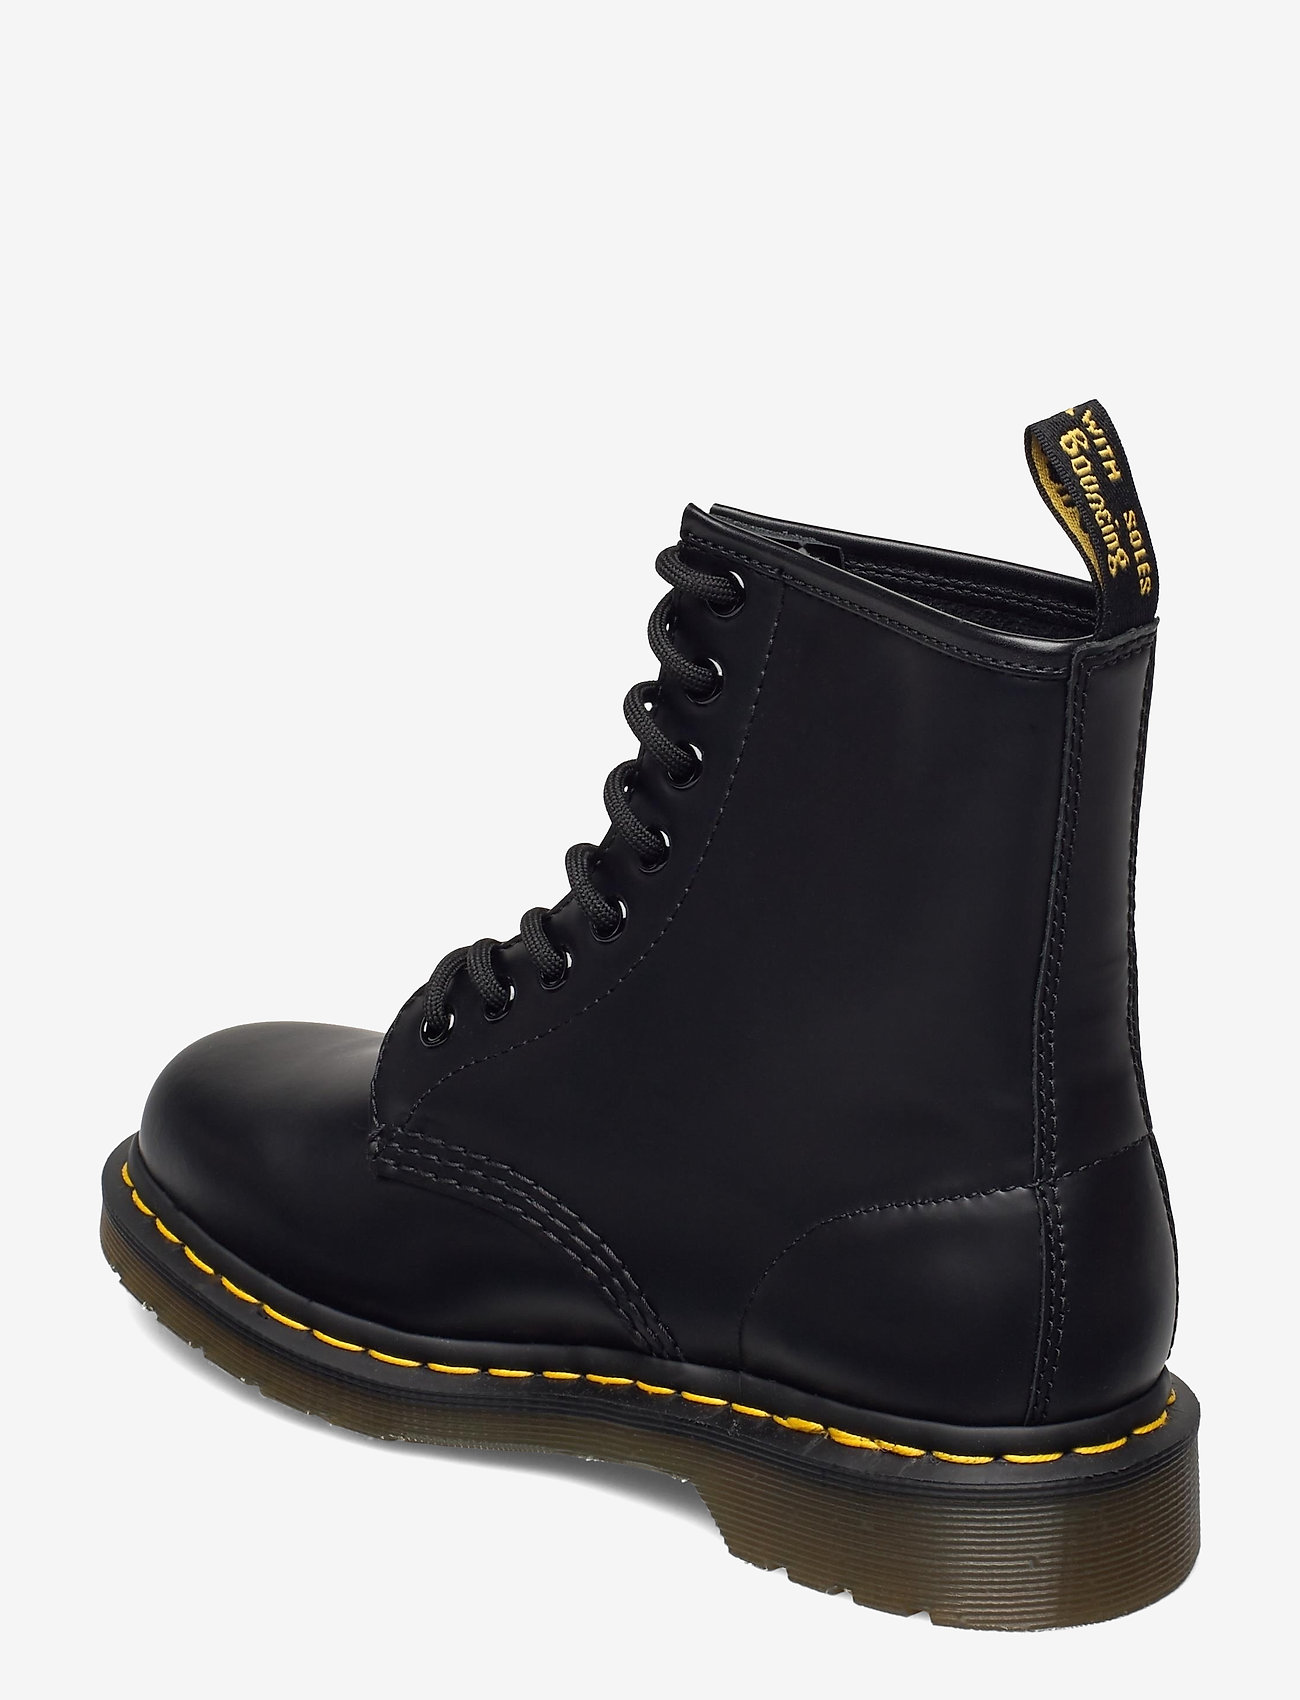 Dr. Martens - 1498 Black Smooth - laced boots - black - 2